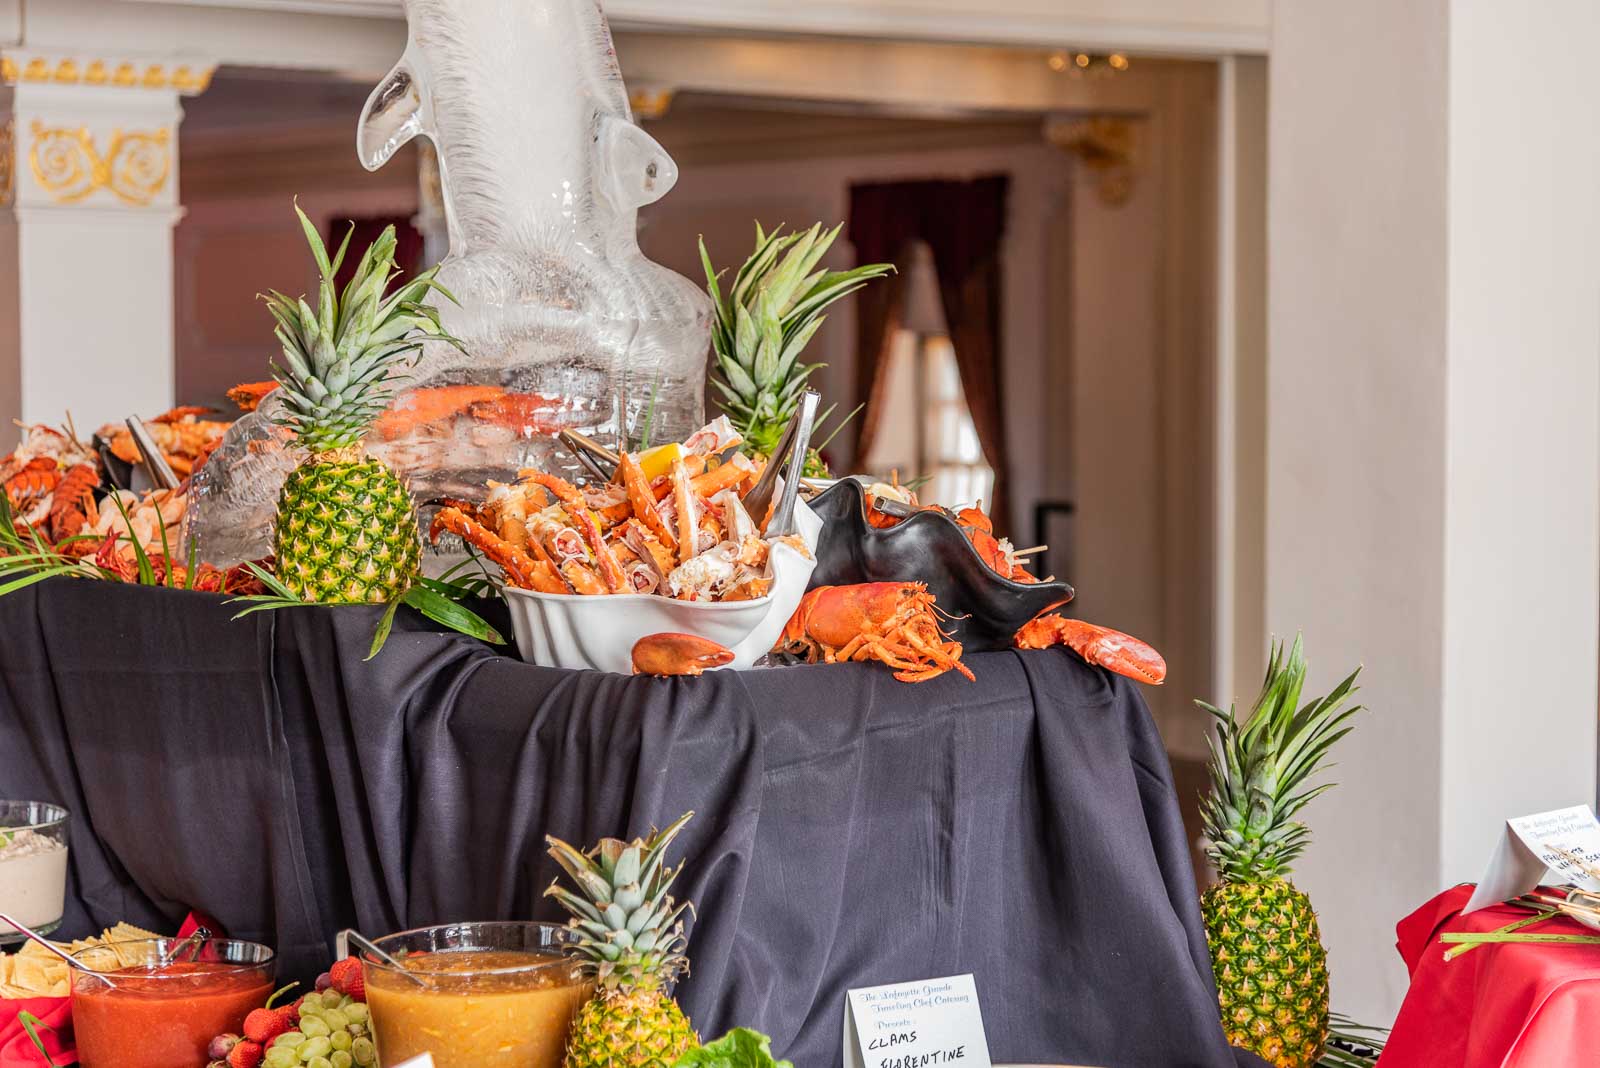 Corporate Party Crab Legs & Lobster Tail spread - served up on the 2nd floor Grande Ballroom.